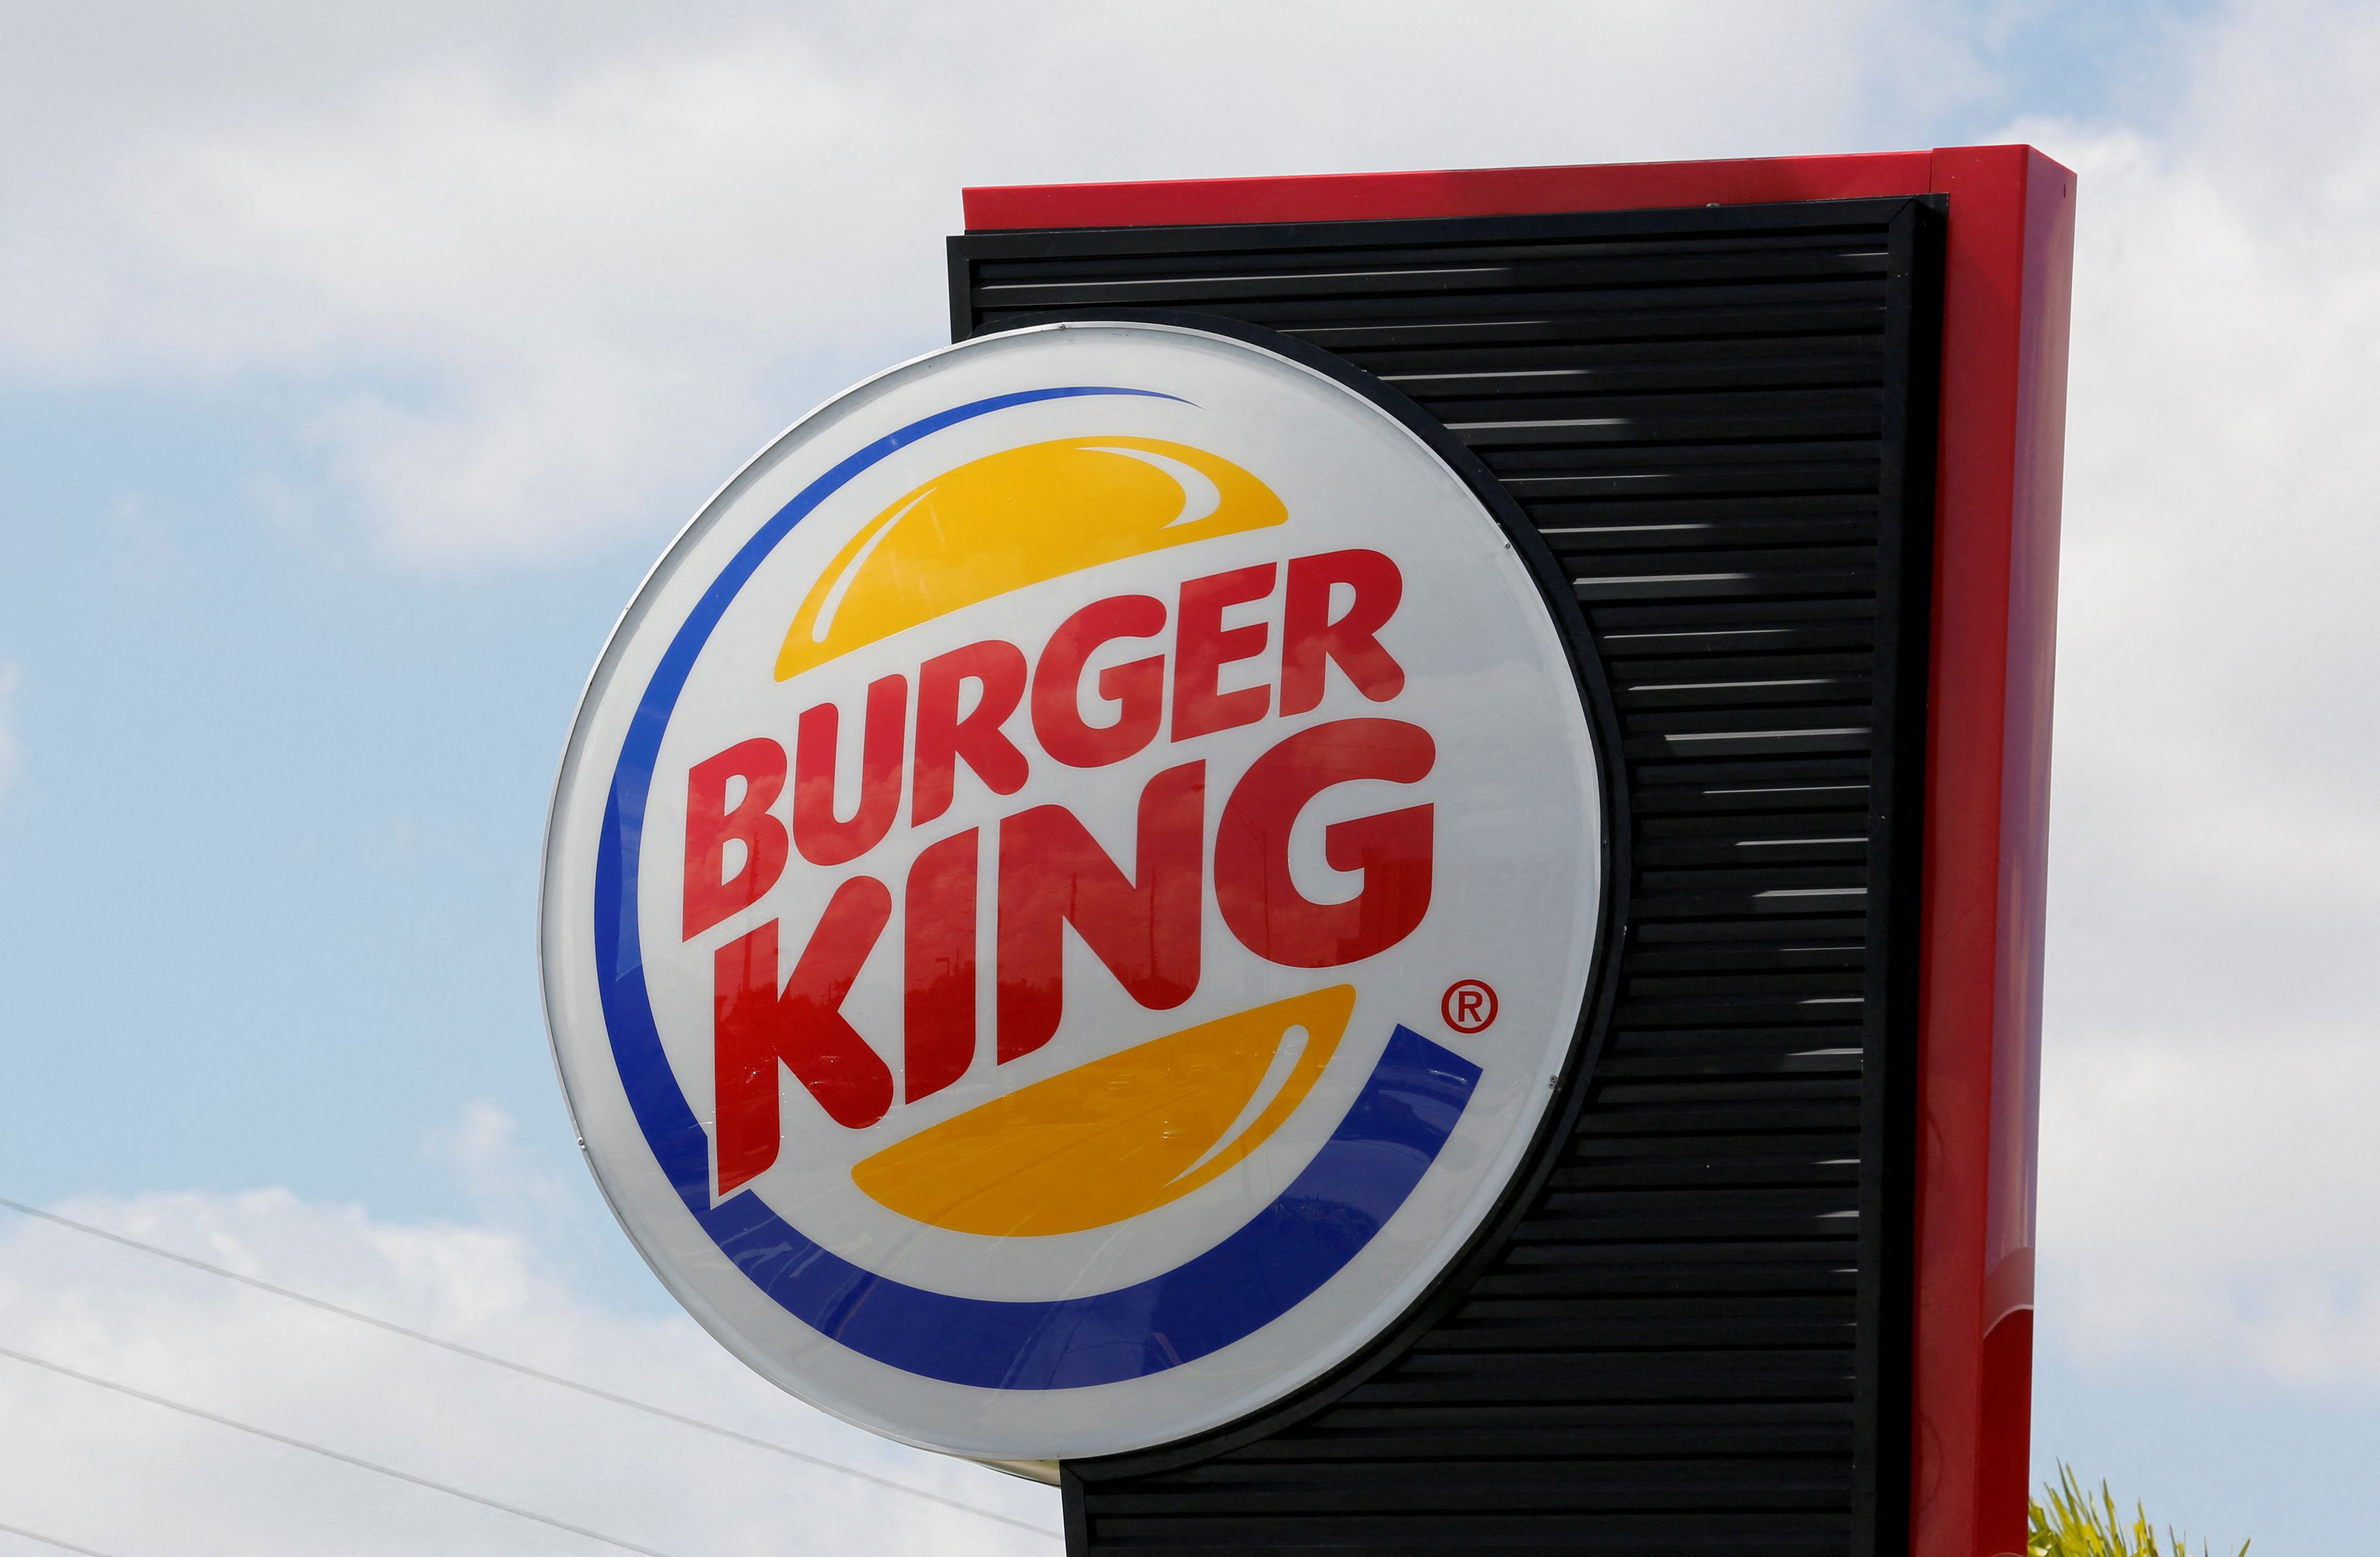 Sign on a Burger King restaurant is shown in Miami